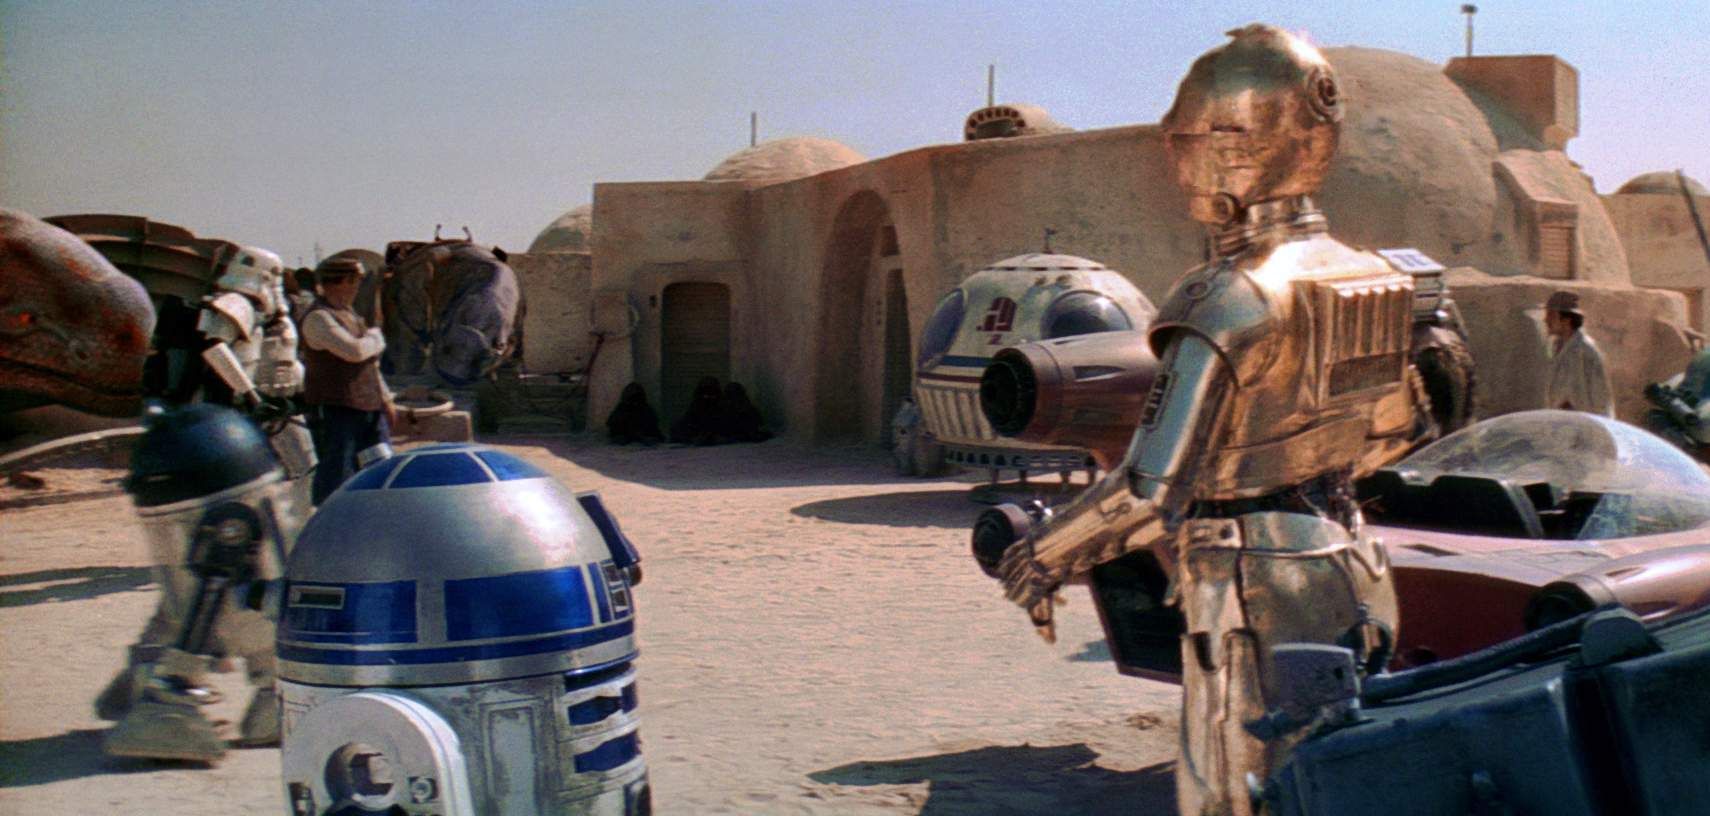 Wretched Hive Of Scum And Villany 10 Things You Didnt Know About Star Wars Mos Eisley